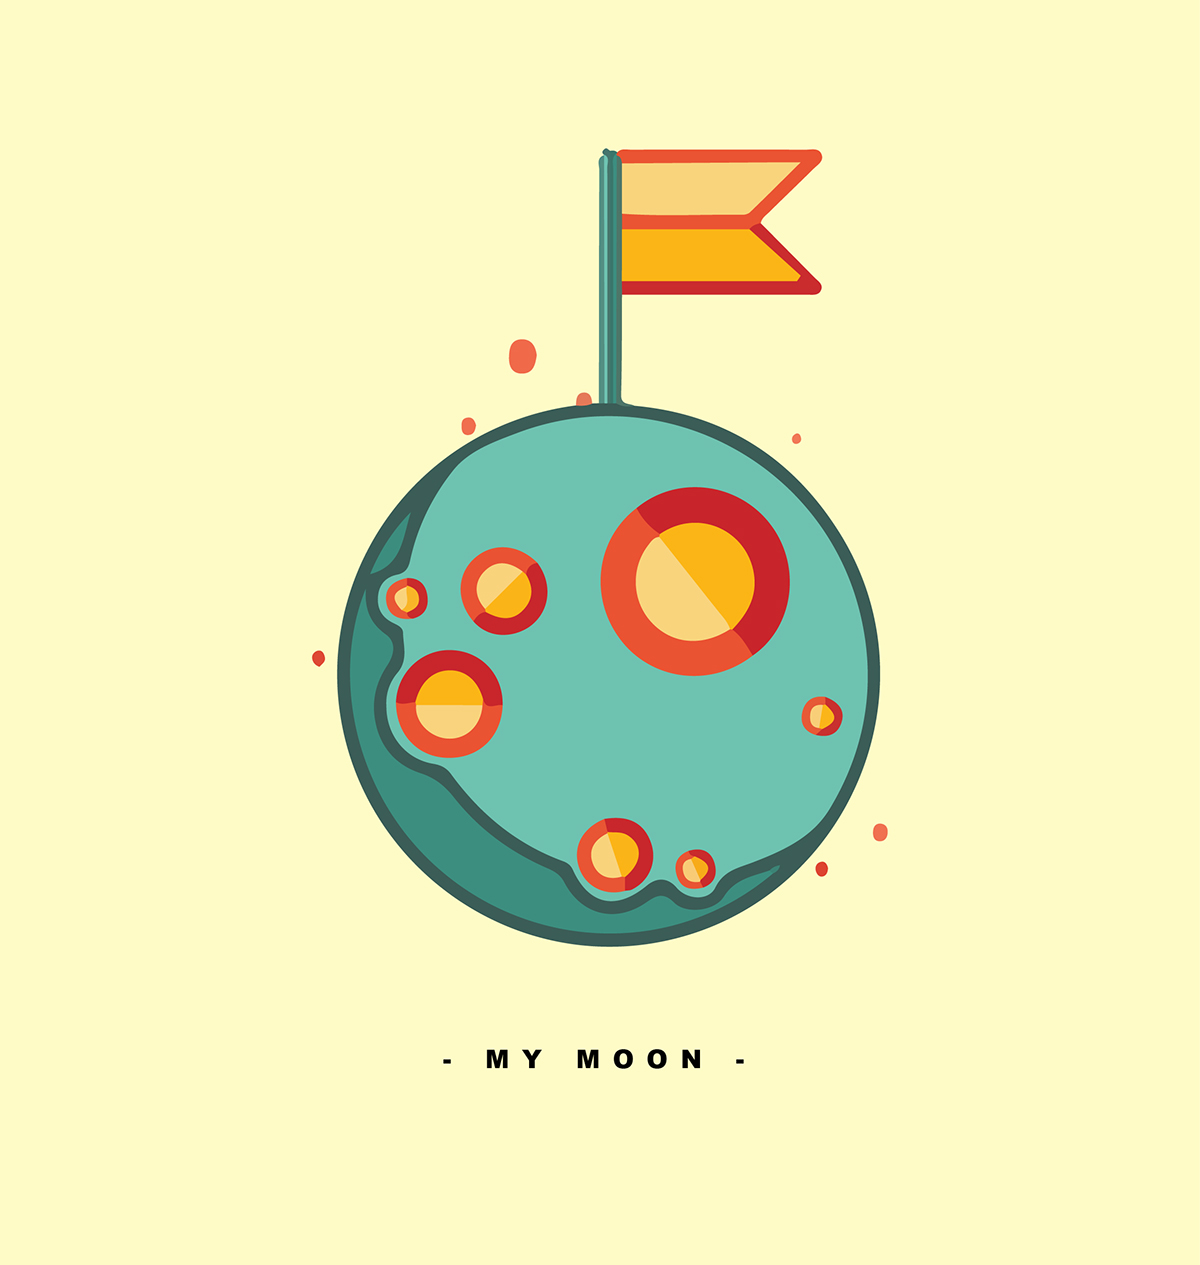 #character #illustration #colorful #red   #yellow #green #orange #cartoon #cute  #dream #fly #space #moon   #spaceship #fiction  